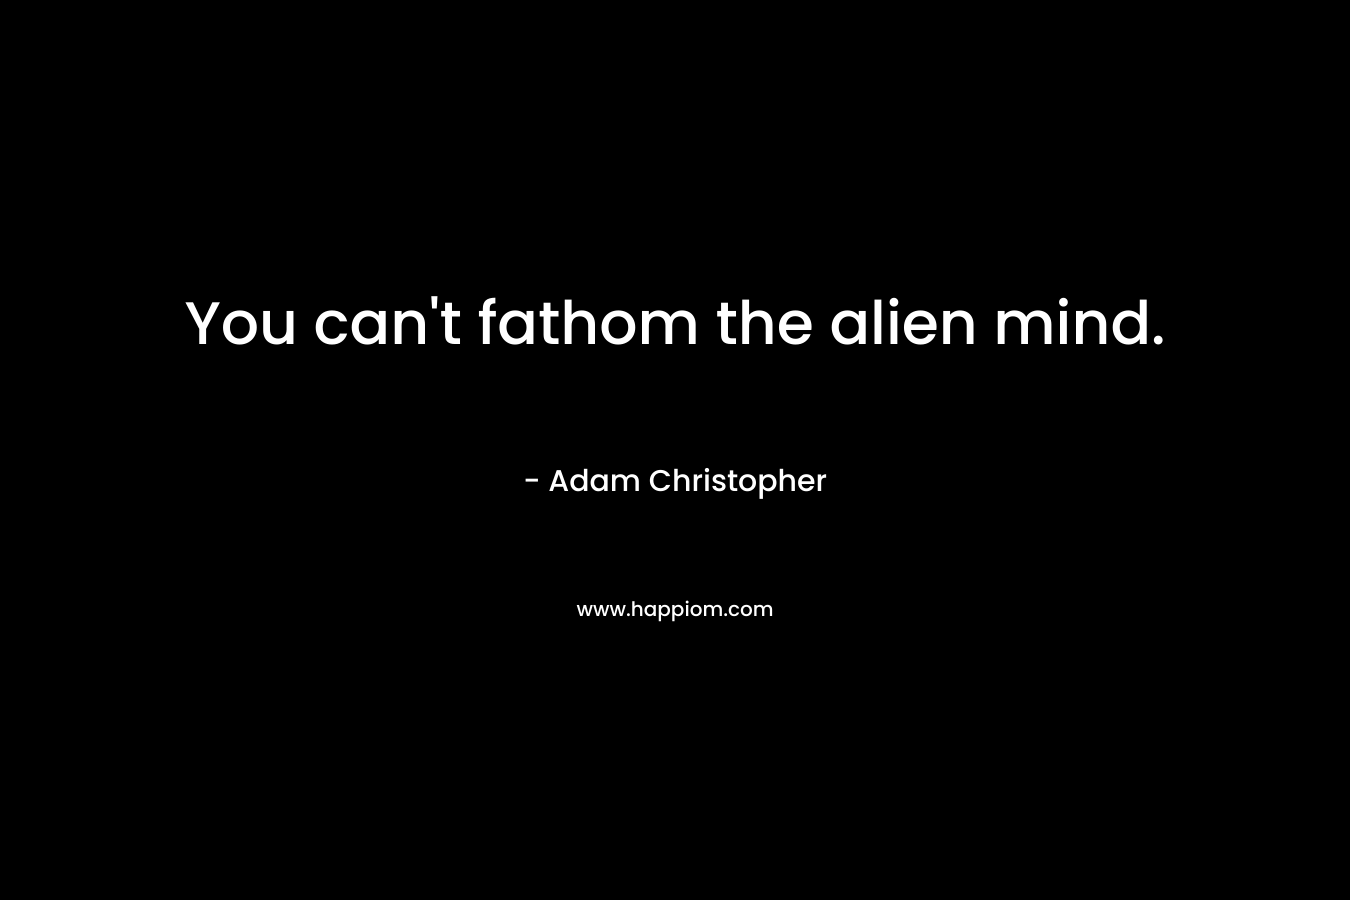 You can't fathom the alien mind.